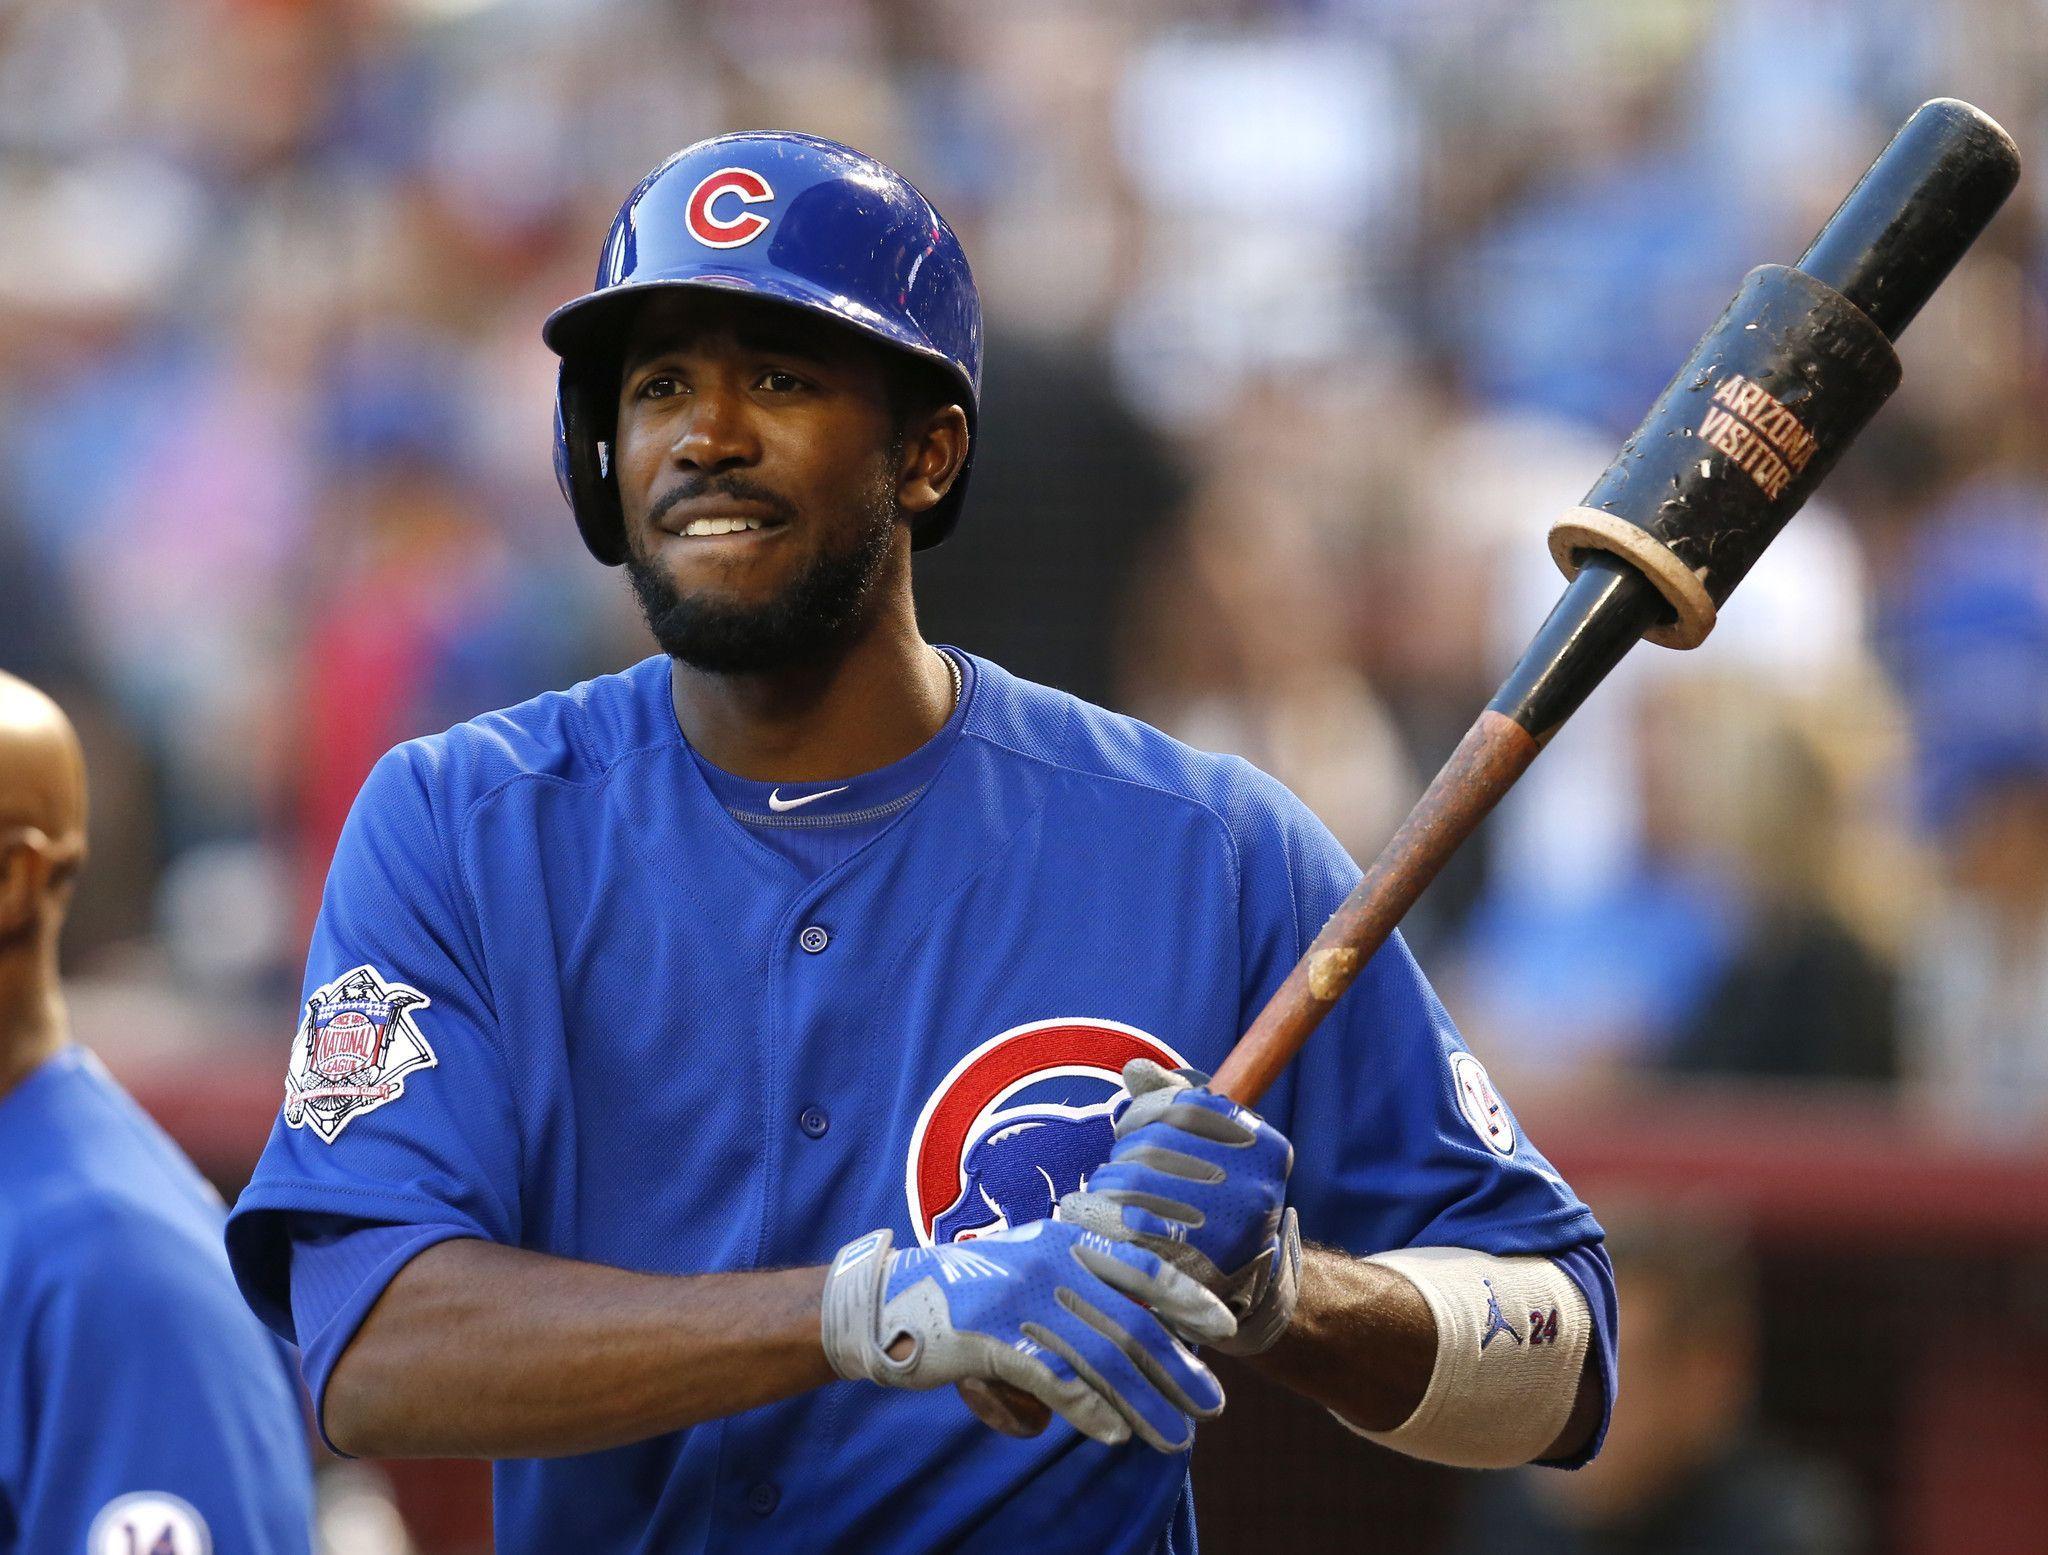 Image result for dexter fowler. Sports Image & Athletes